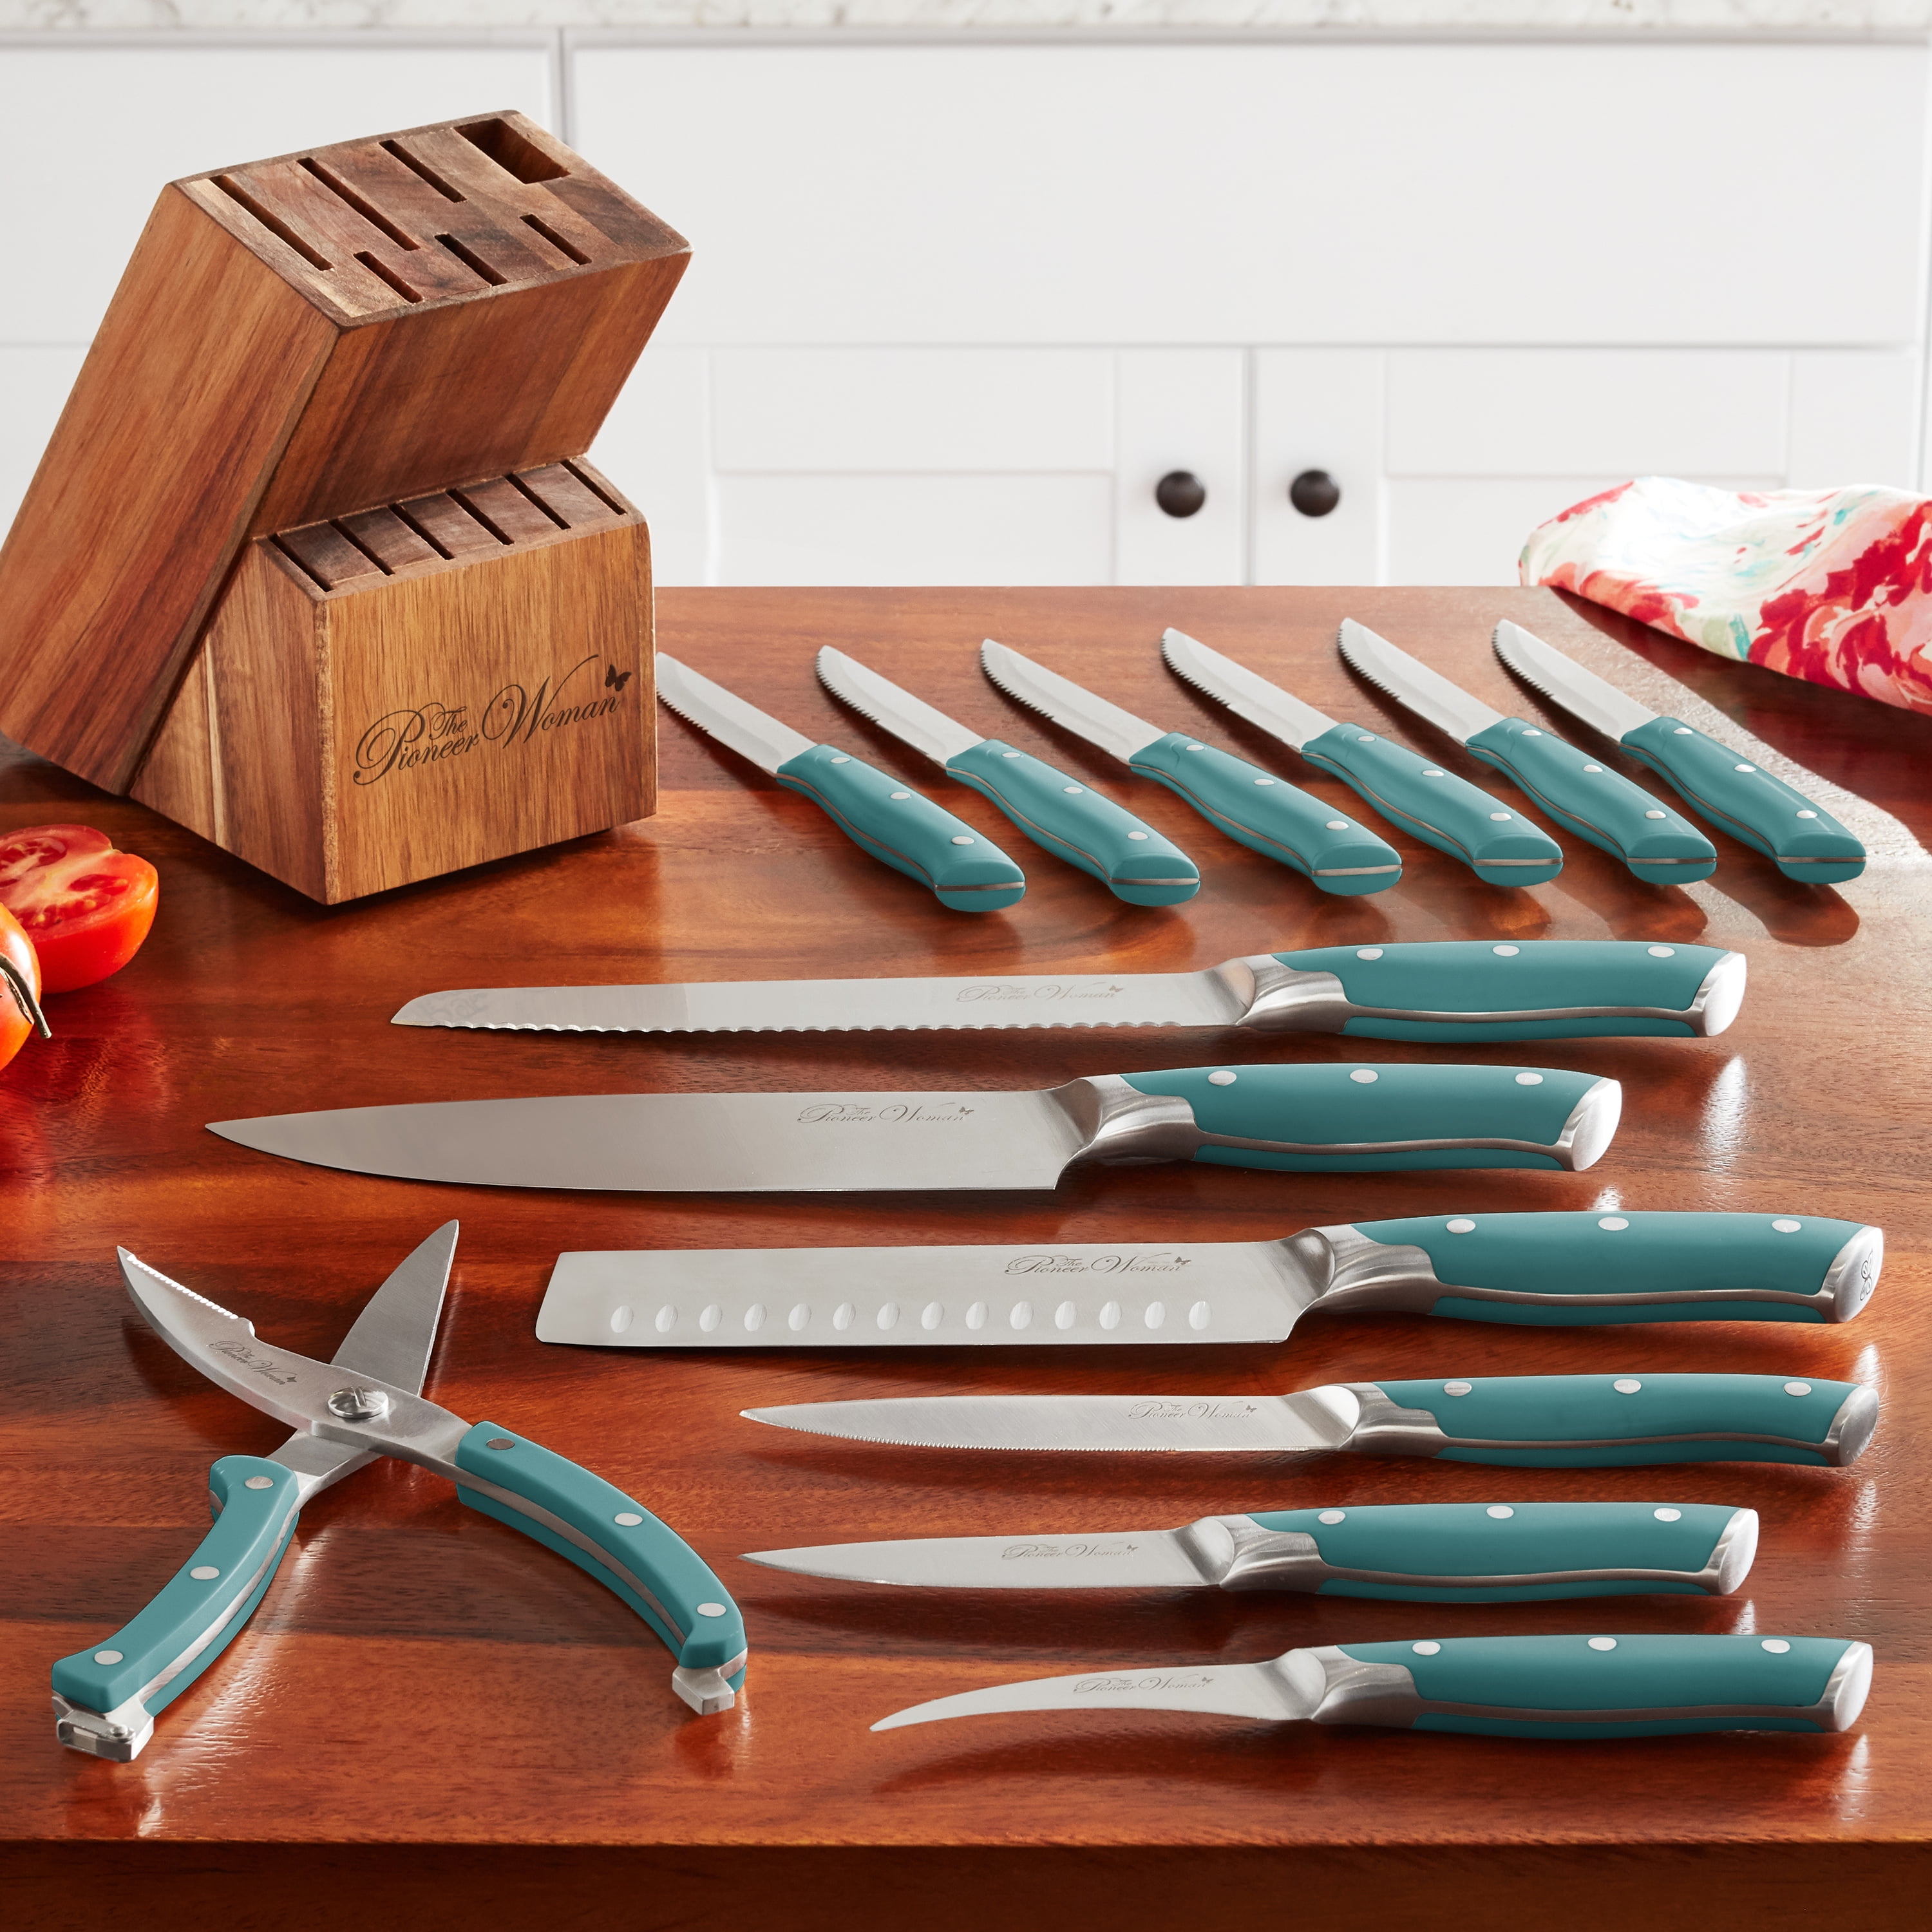 Get a Pioneer Woman 20-piece stainless steel cutlery set for $20